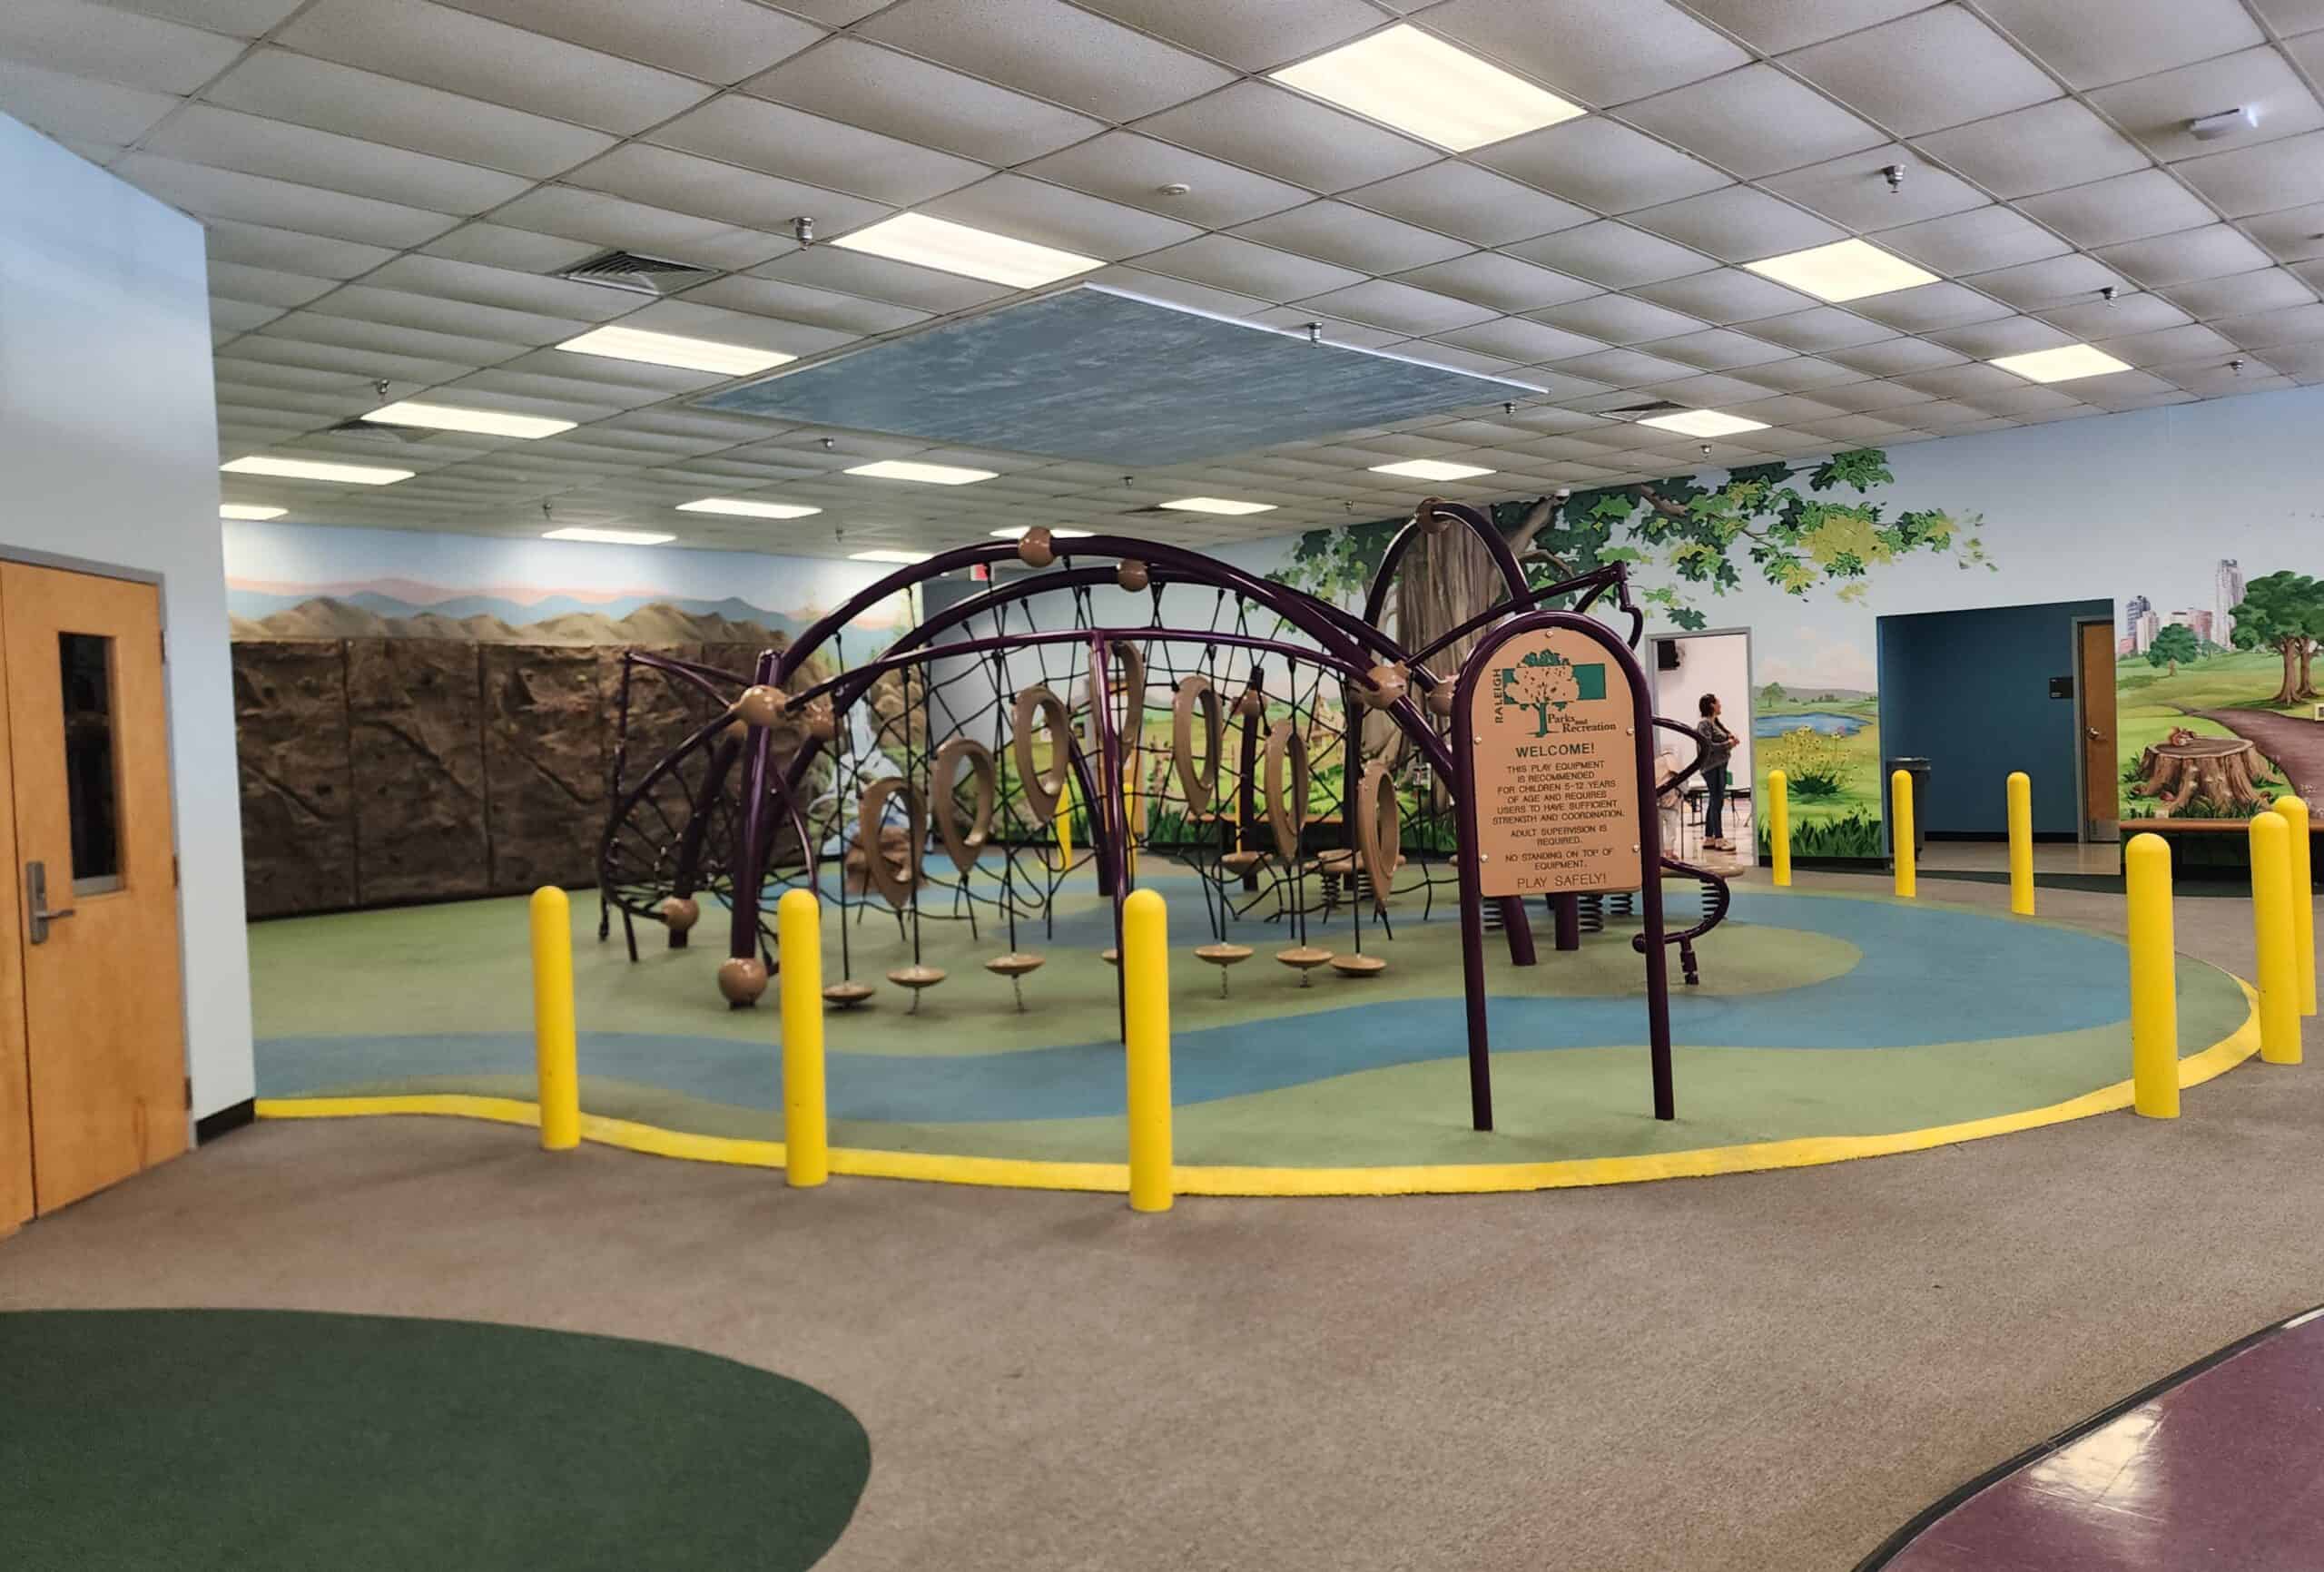 an indoor playground with lots of lcimbing structures and ropes and a nature-themed mural on the wall behind it